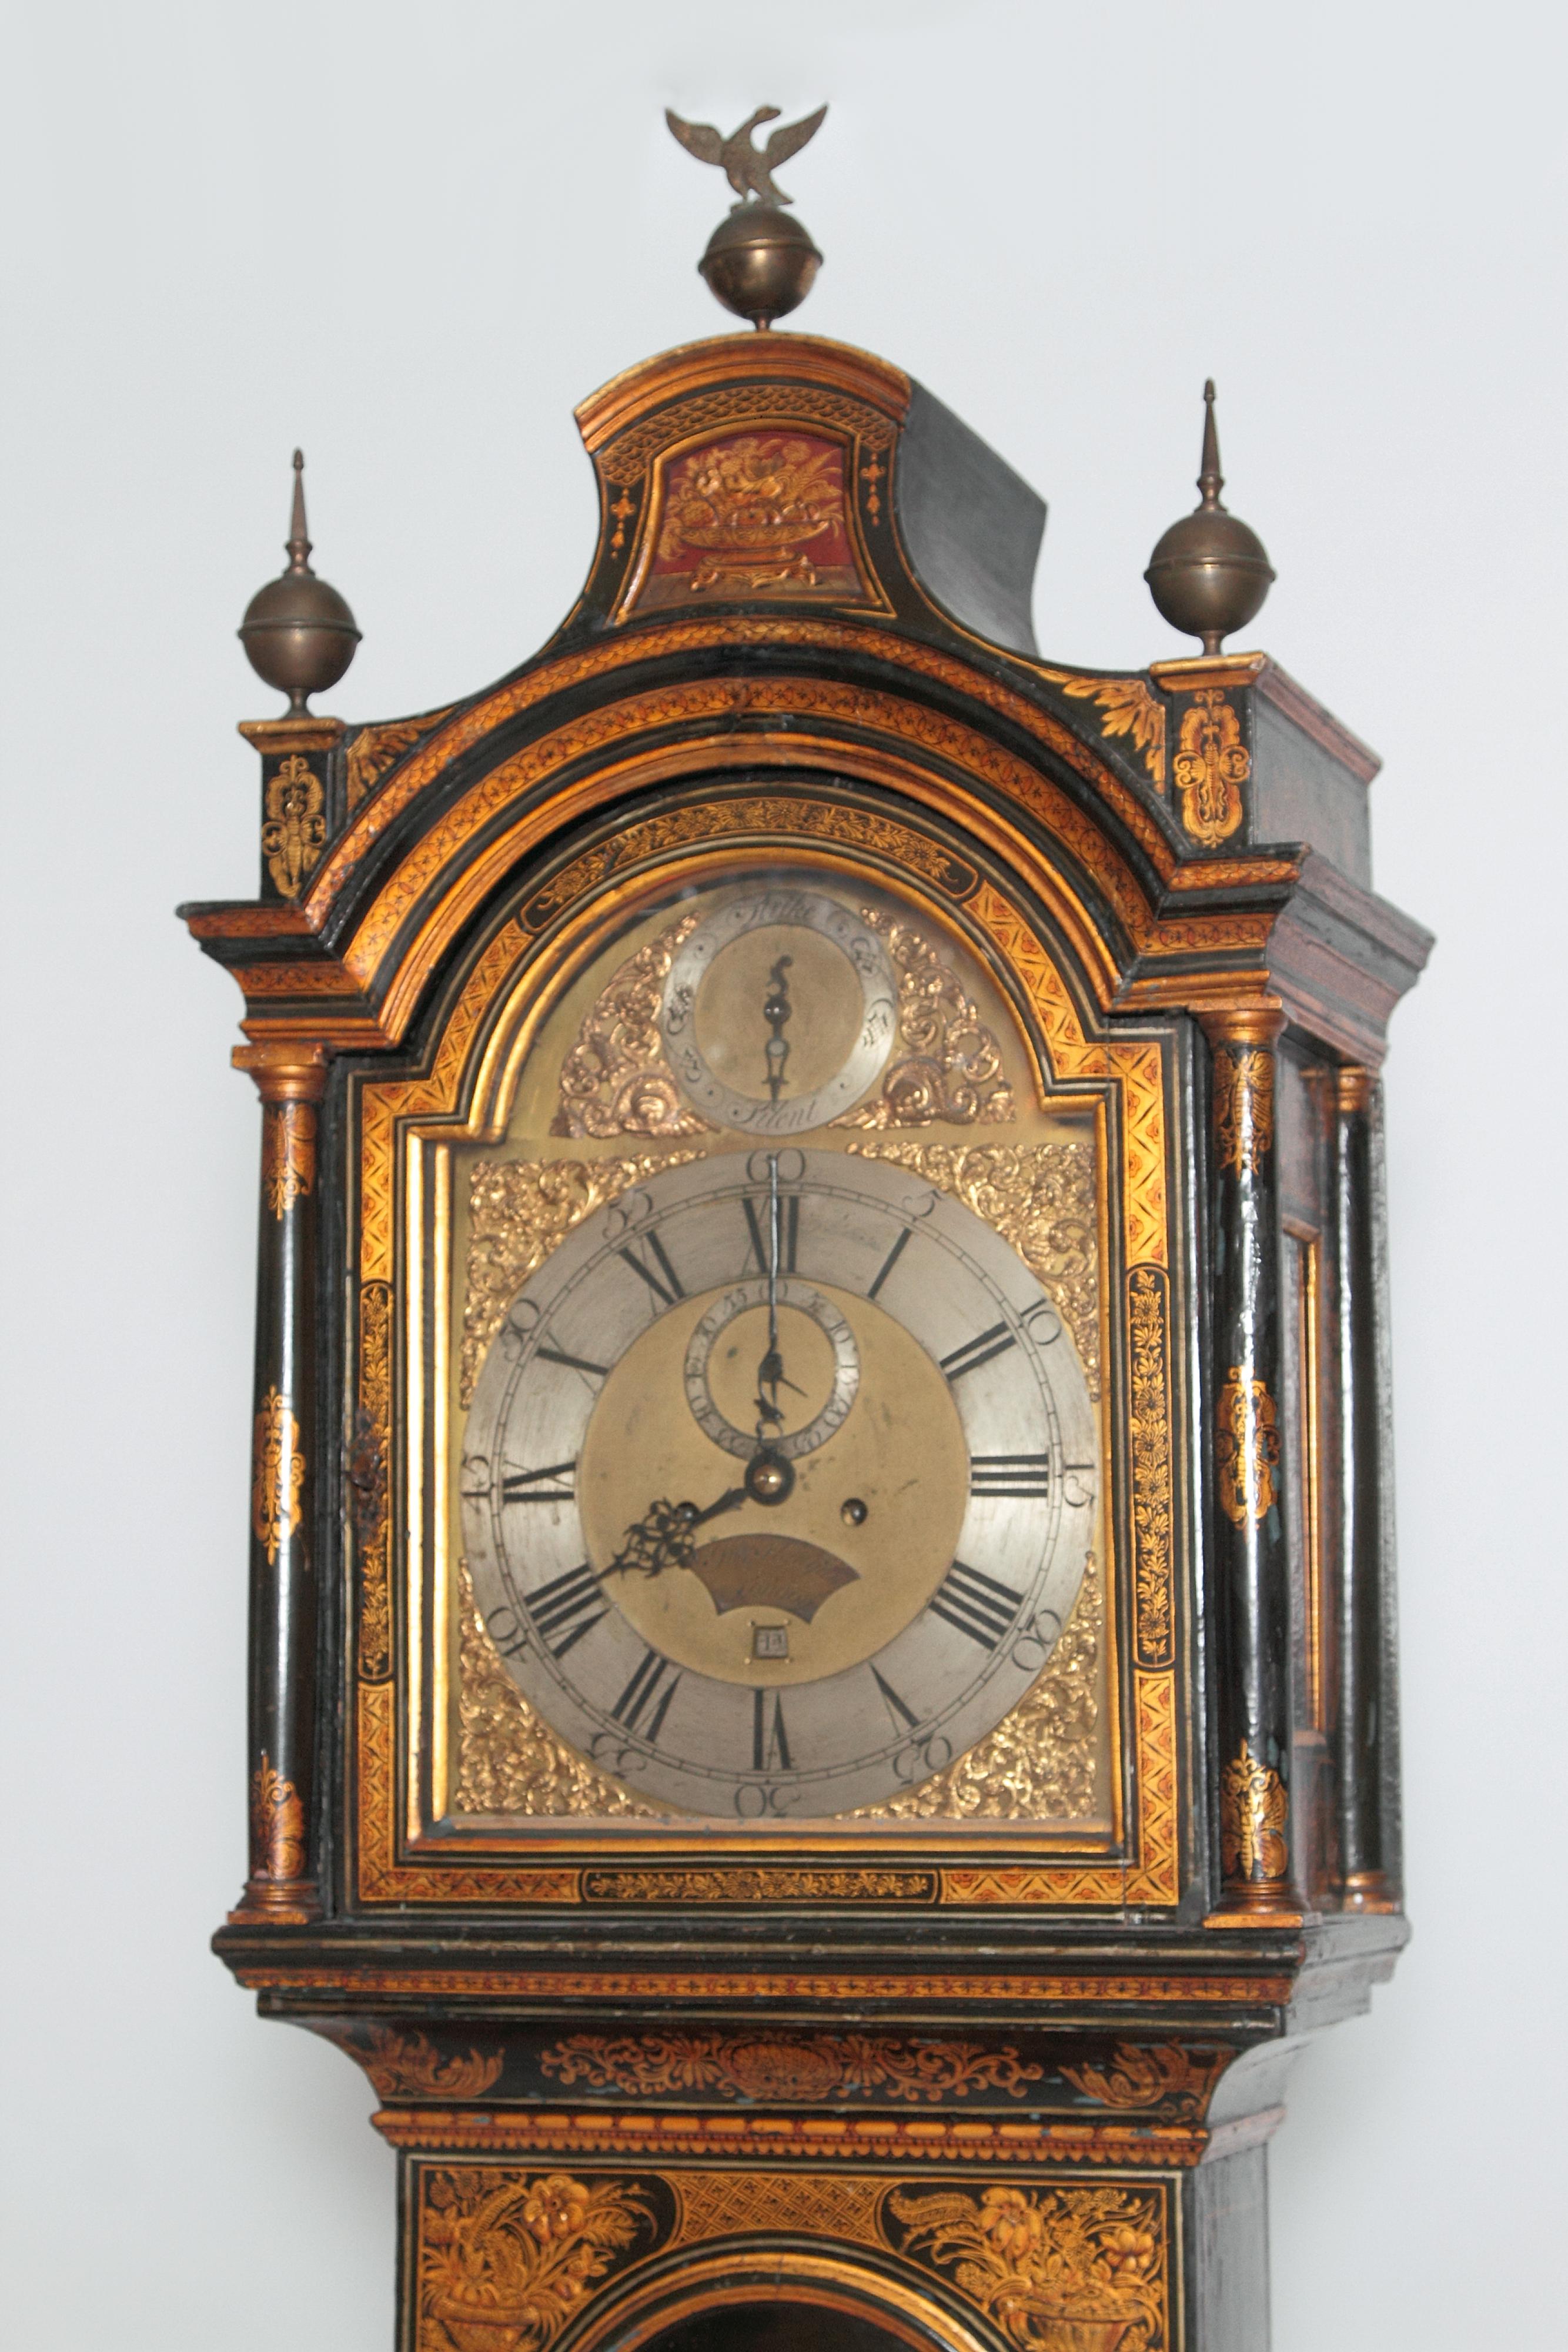 George II lacquered chinoiserie tall case clock inscribed Jno. Fladgate, London. The arched hood with pagoda top surmounted by three brass ball finials, the center finial with an eagle. Sides of hood have glass panels revealing the works inside. The